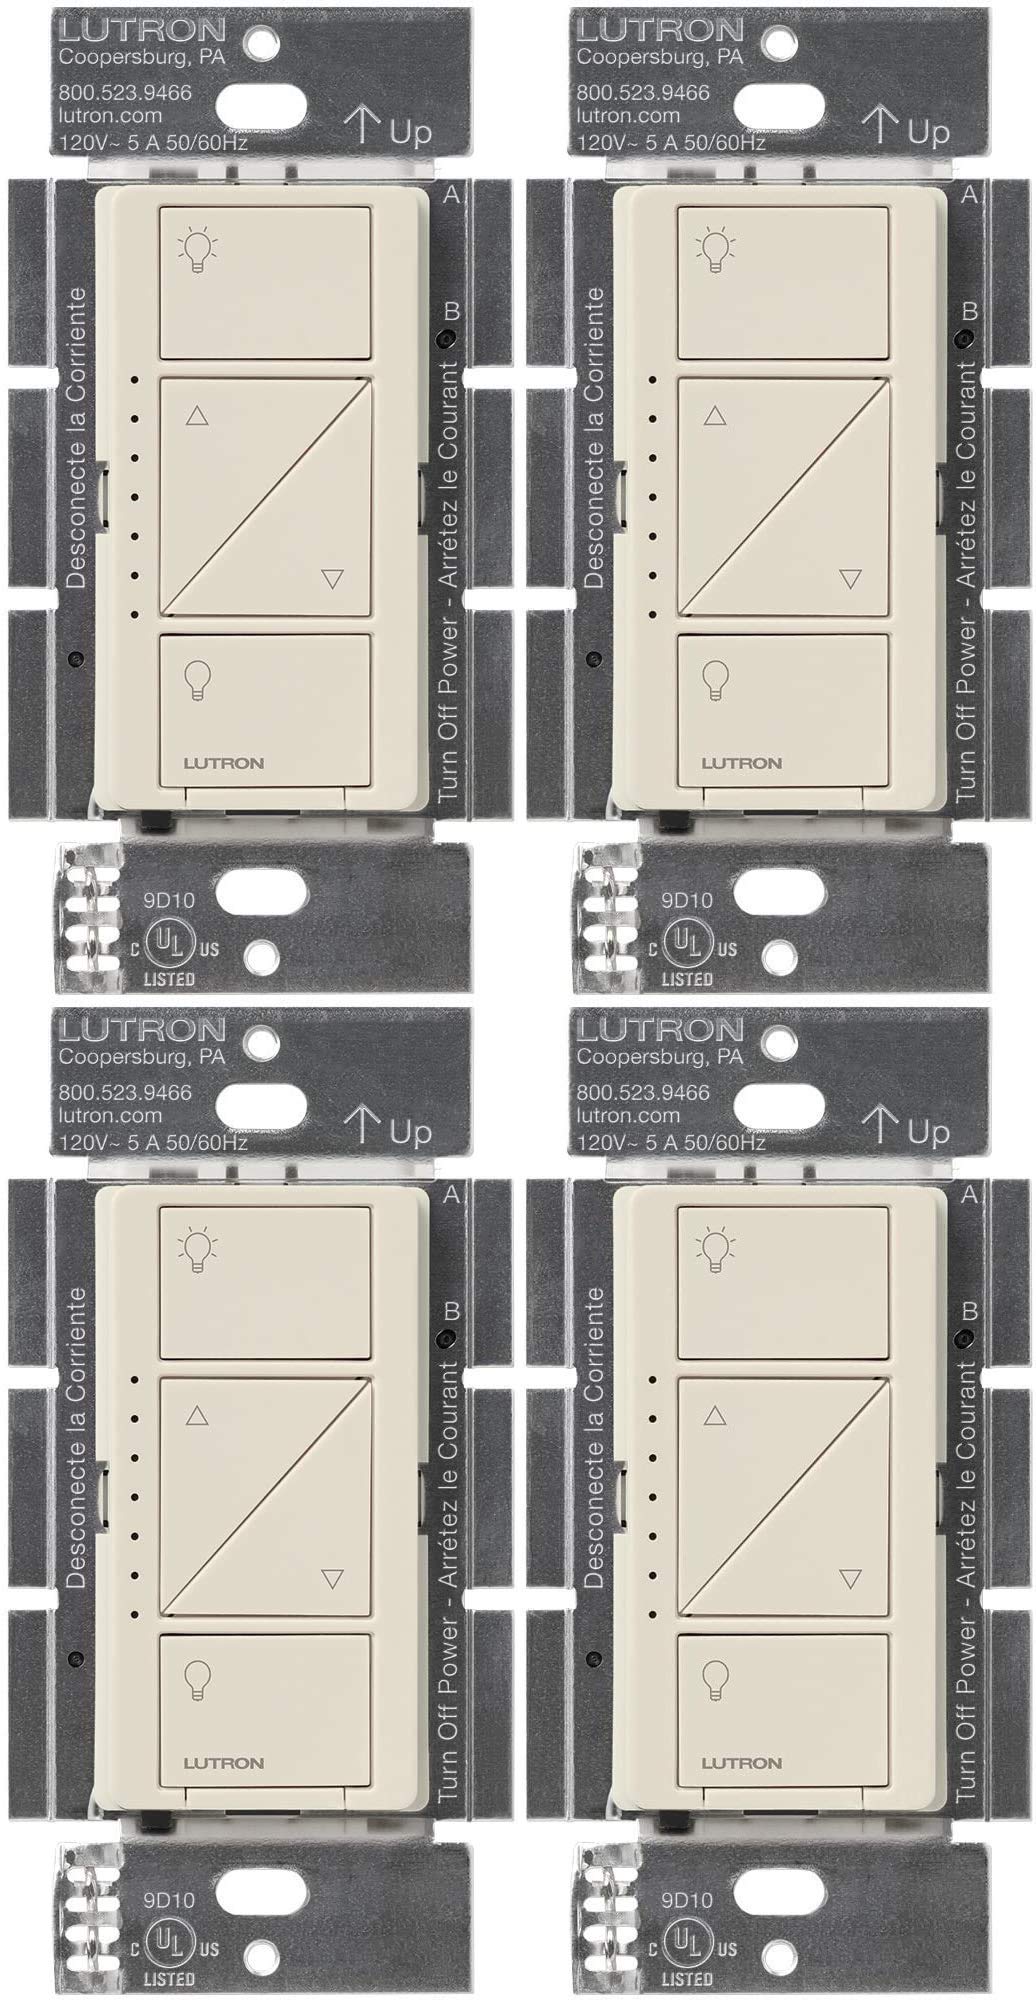 Lutron Caseta Wireless Smart Dimmer Switch for Wall & Ceiling, PD-6WCL-LA, Light Almond, Compatible with Alexa, Apple HomeKit, and The Google Assistant (4-Pack)